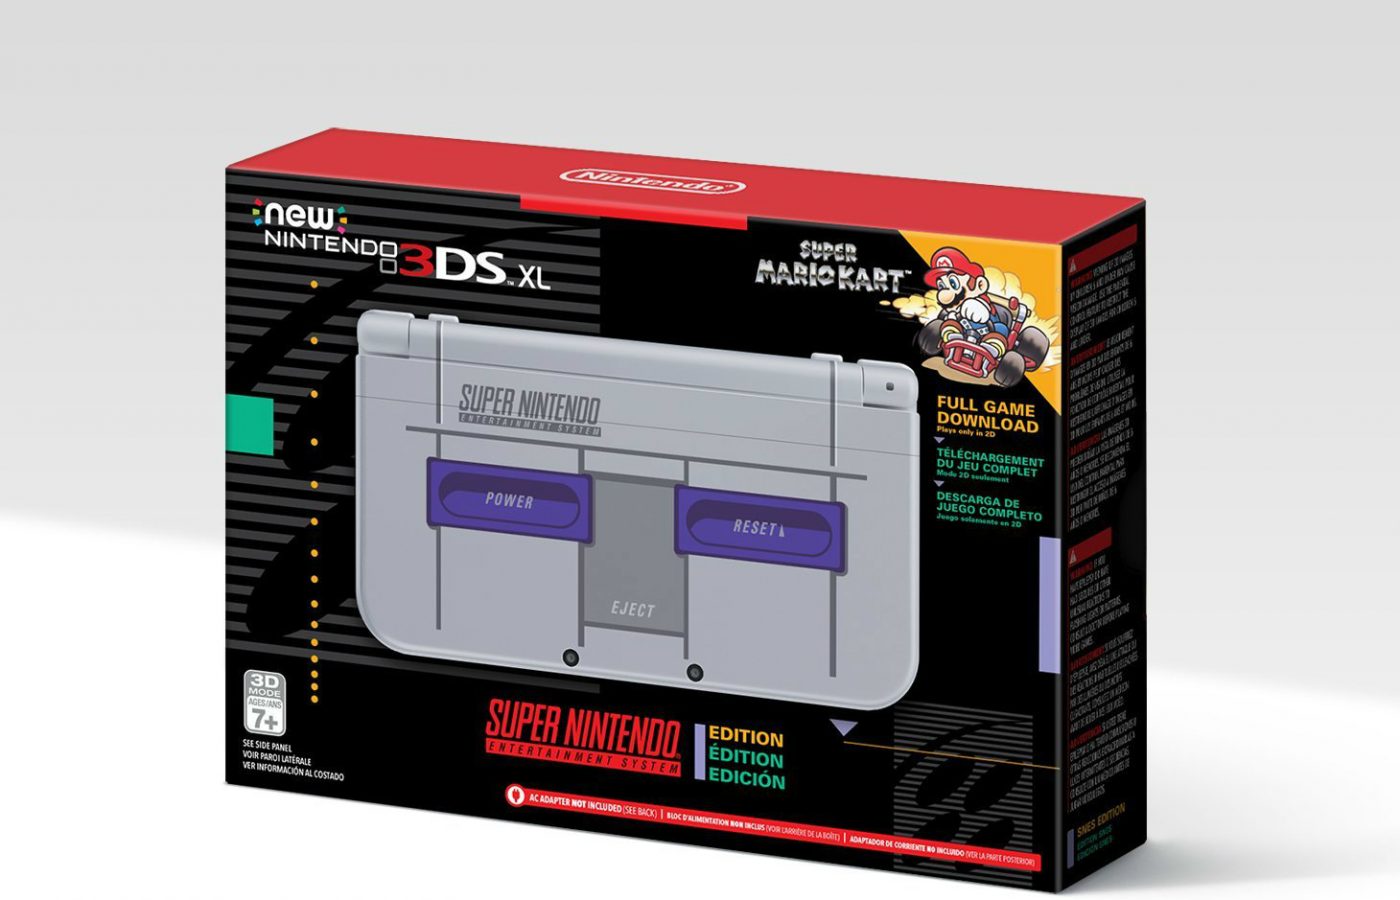 The Nintendo 3DS XL SNES Edition is coming to the US as an Amazon exclusive